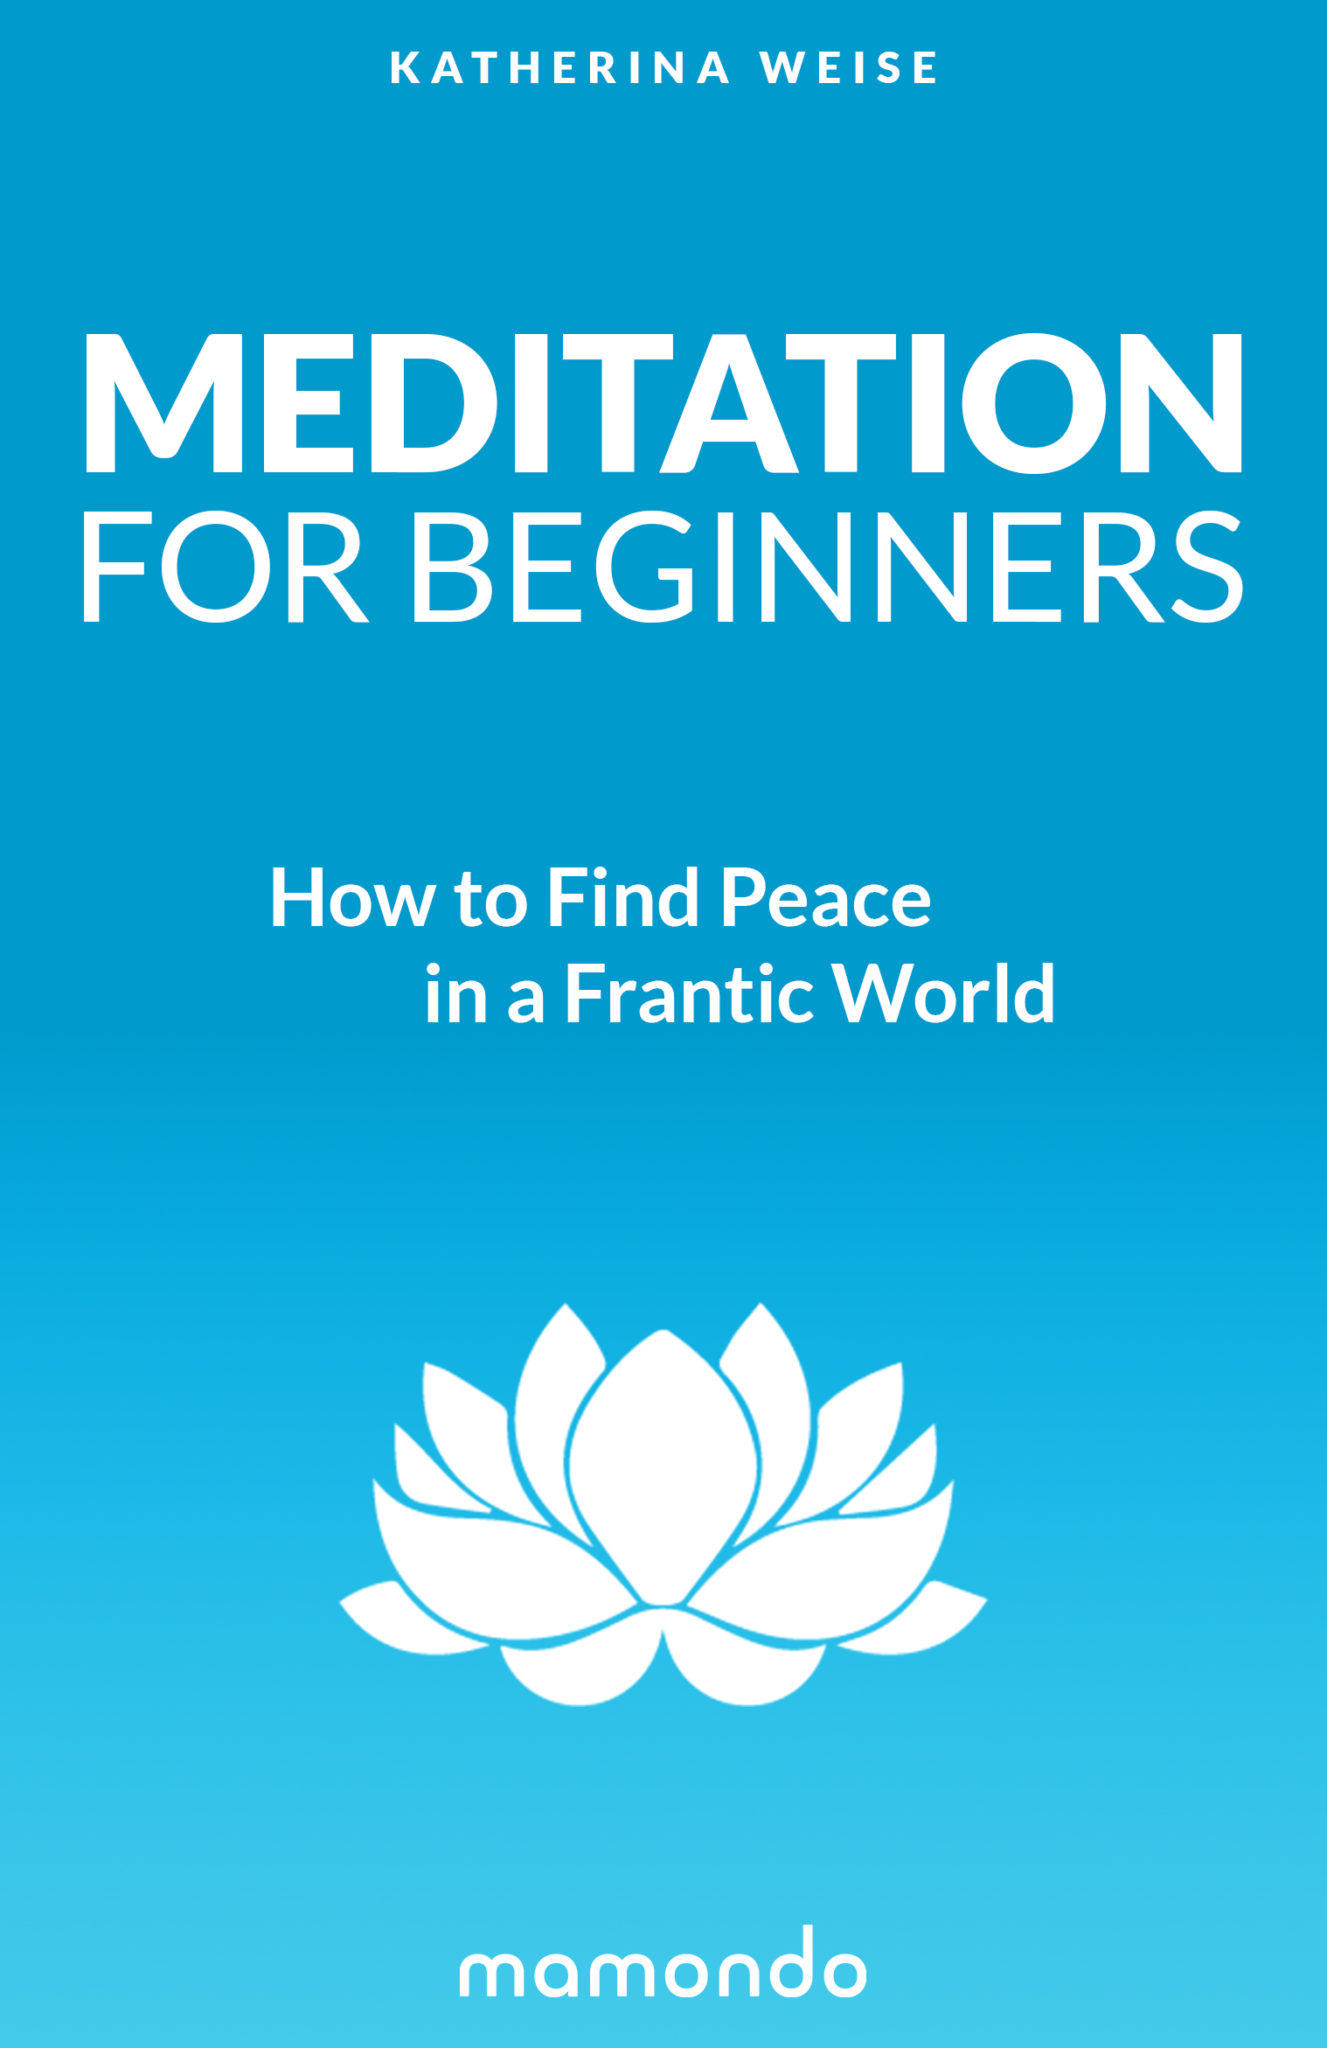 FREE: Meditation For Beginners: How to Find Peace in a Frantic World by Mamondo